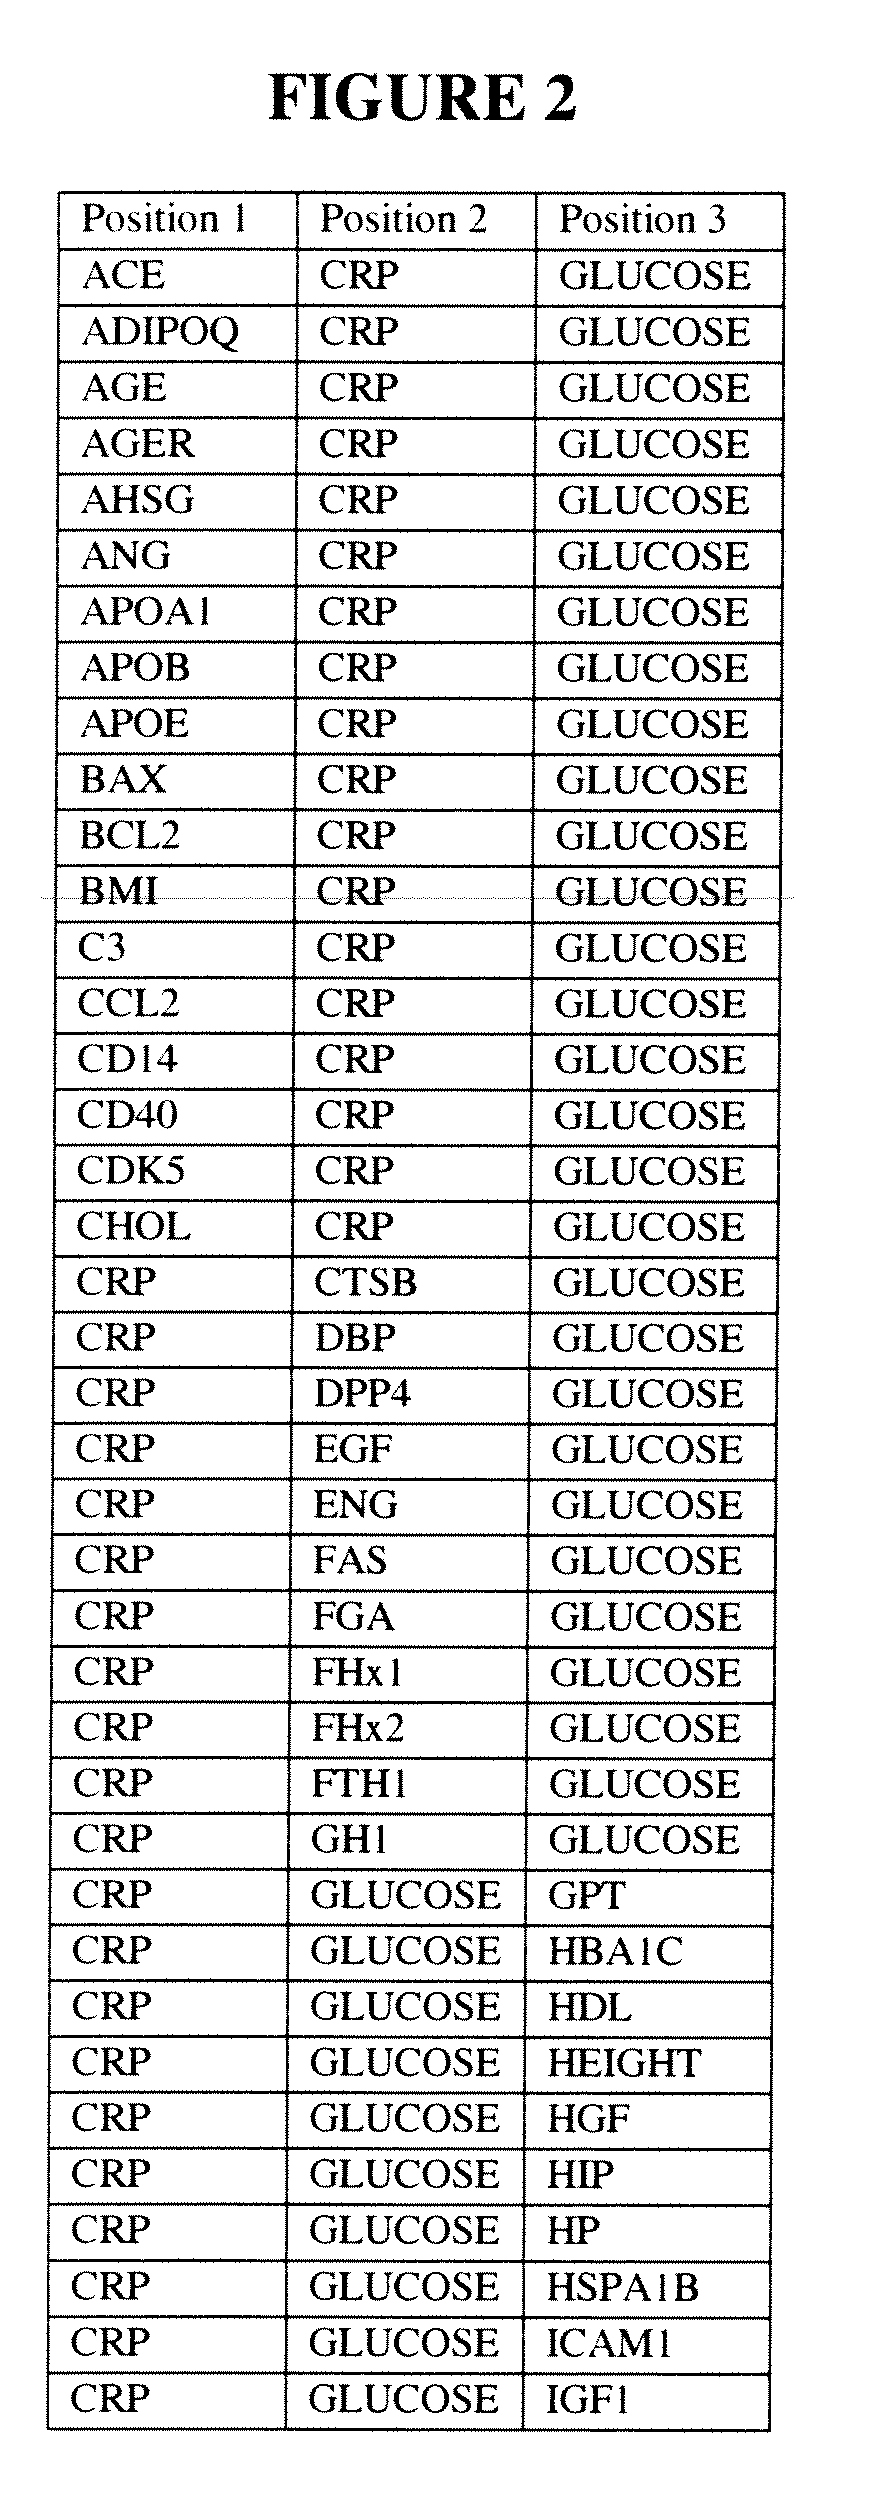 Diabetes-related biomarkers and methods of use thereof